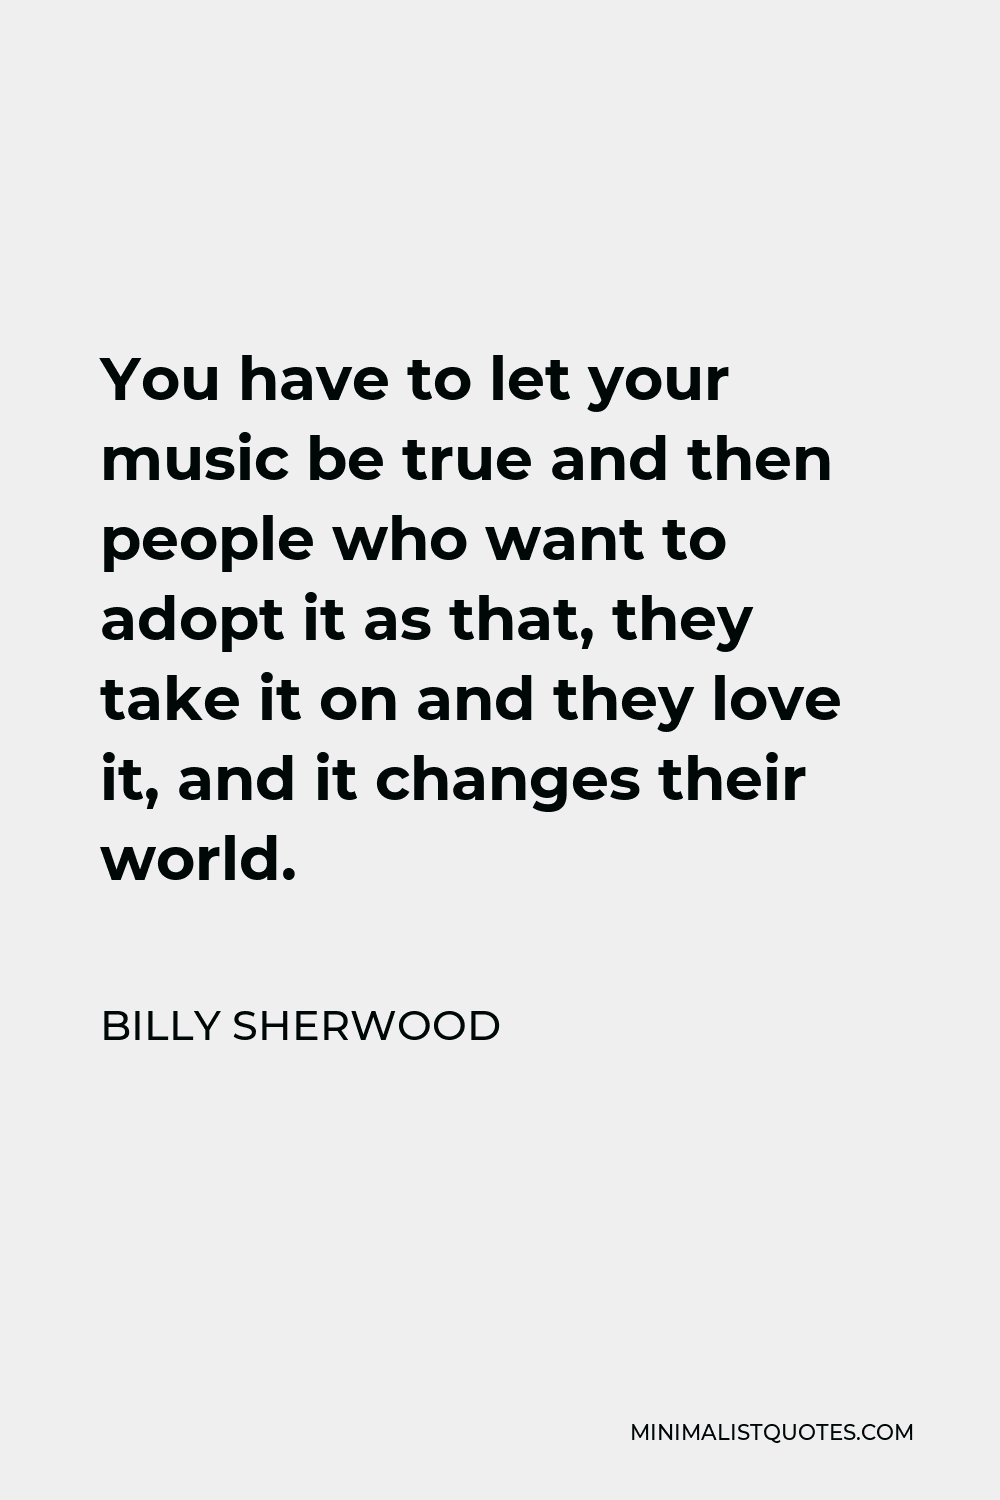 Billy Sherwood Quote - You have to let your music be true and then people who want to adopt it as that, they take it on and they love it, and it changes their world.